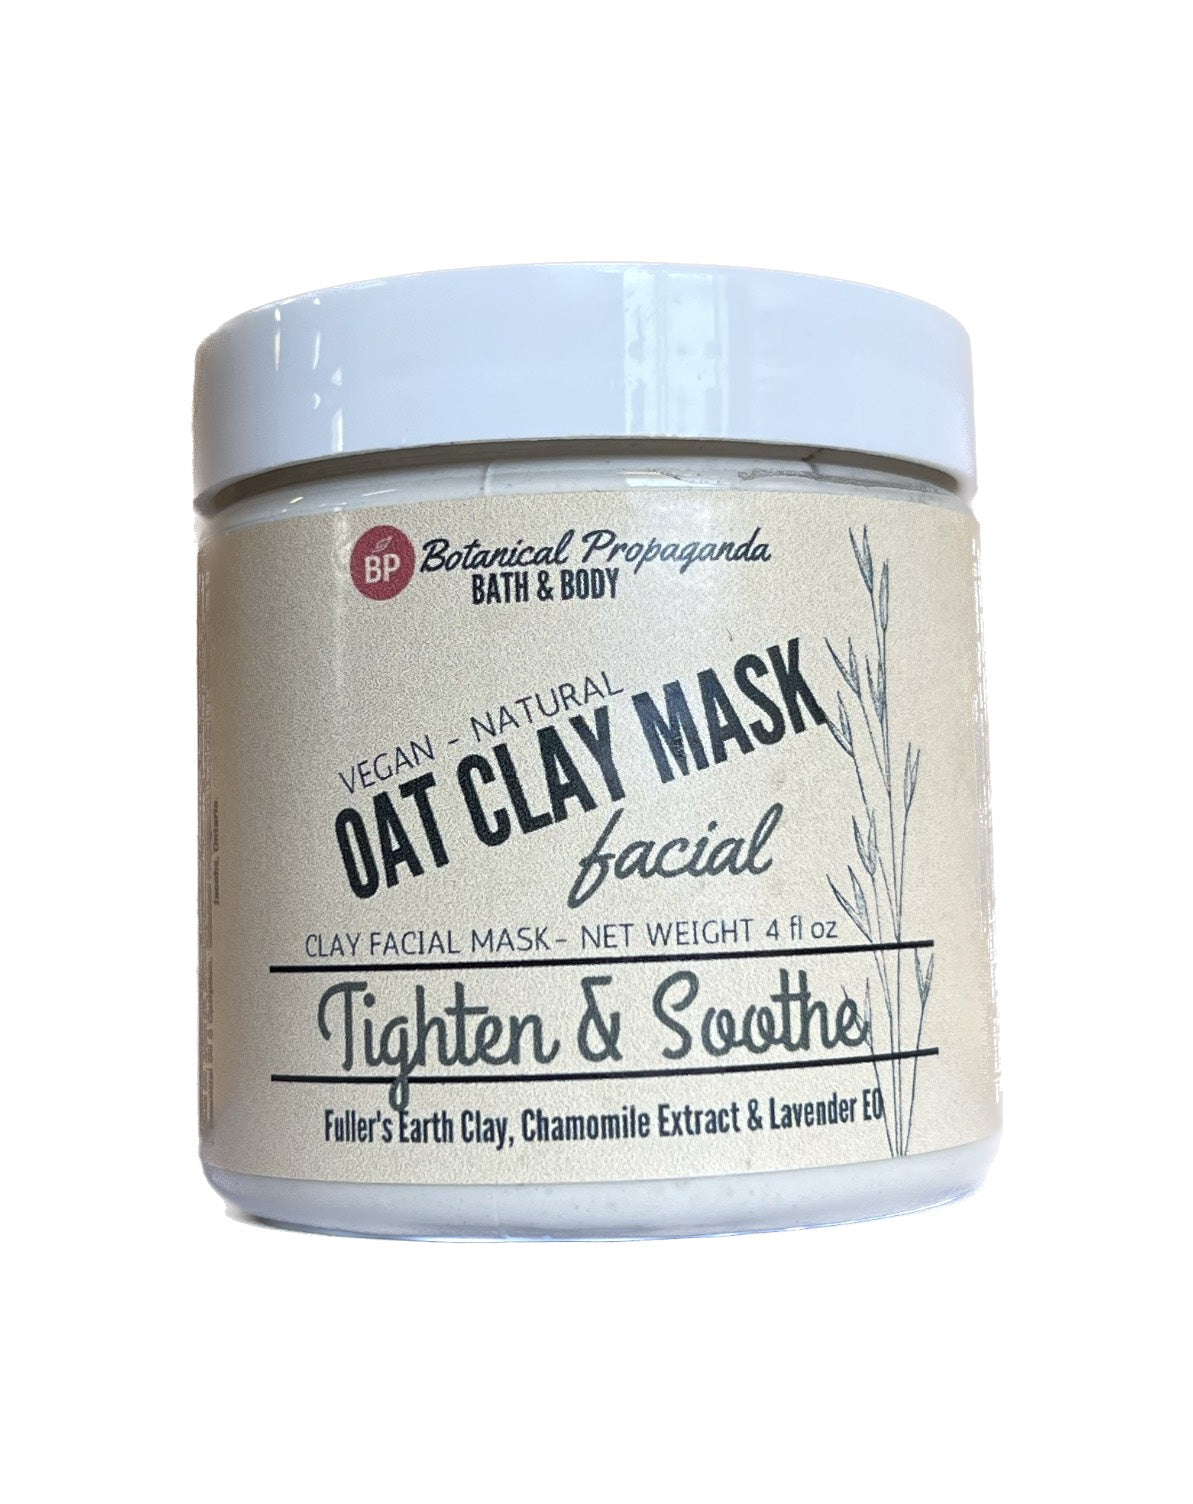 Oat Clay Mask (tighten & sooth)